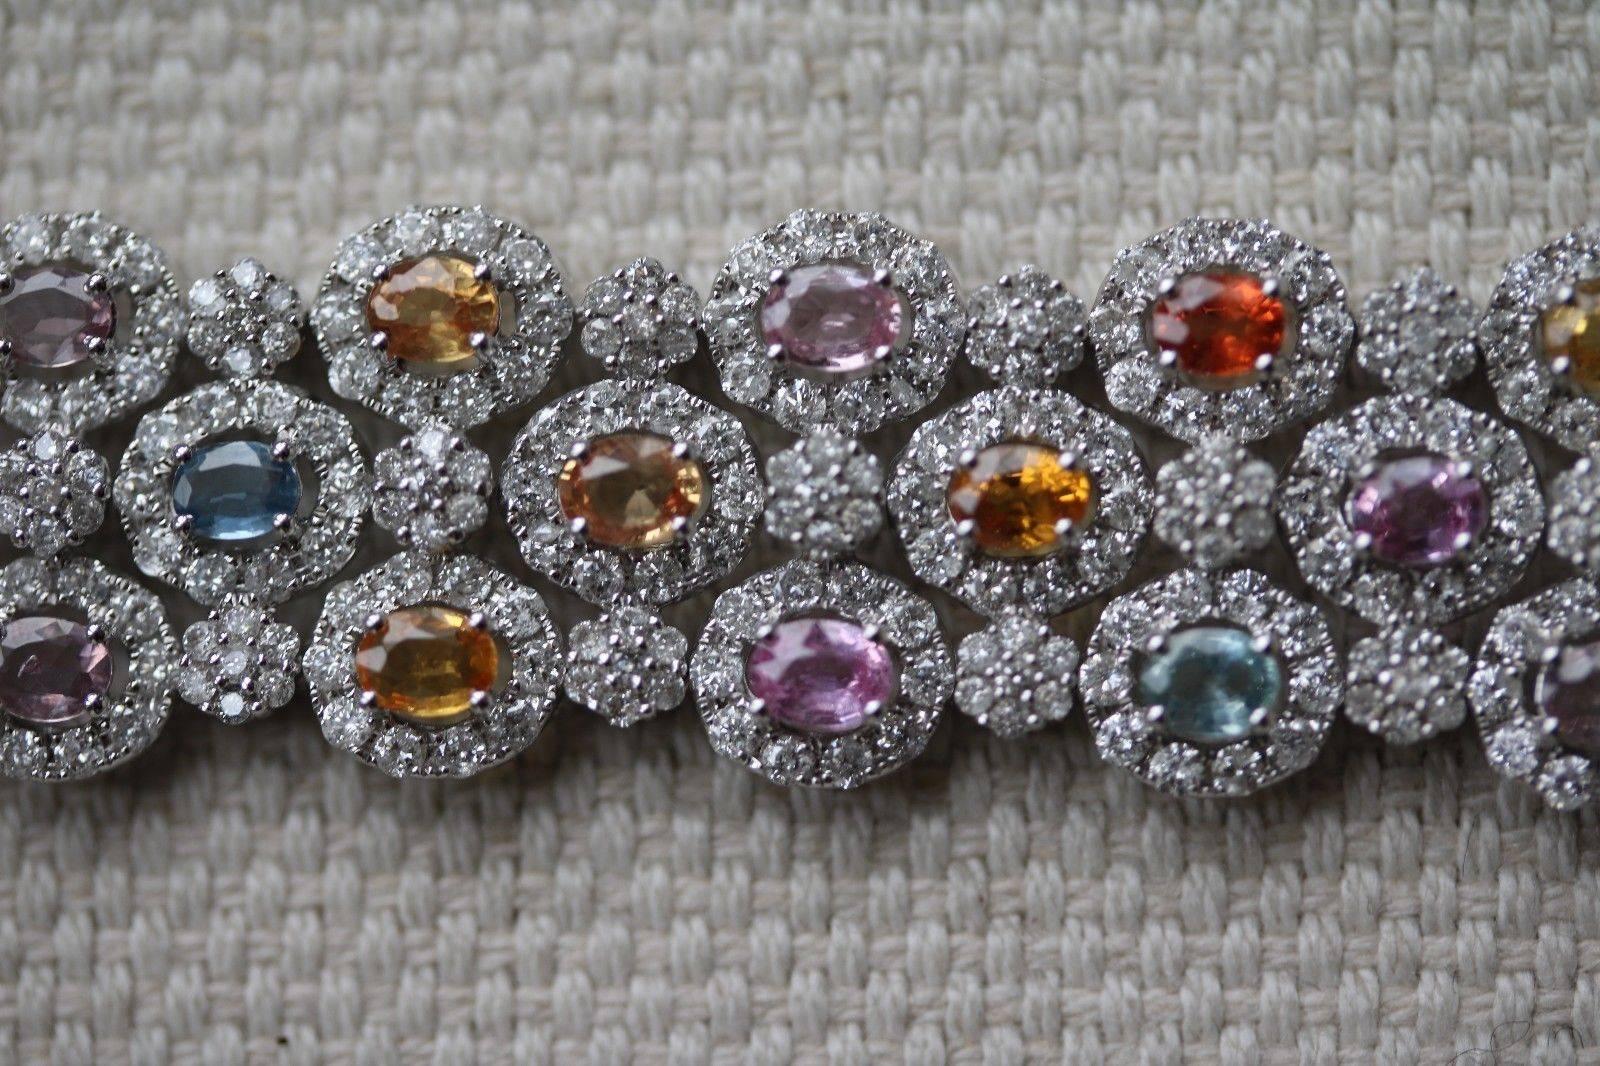 Stunningly pretty and sparkly diamond bracelet. Diamond bracelet with citrine and topaz gems. Actual designer unknown so valued as a non designer bracelet making this stunning piece particularly good value. Hallmarked 750.  Approximate diamond